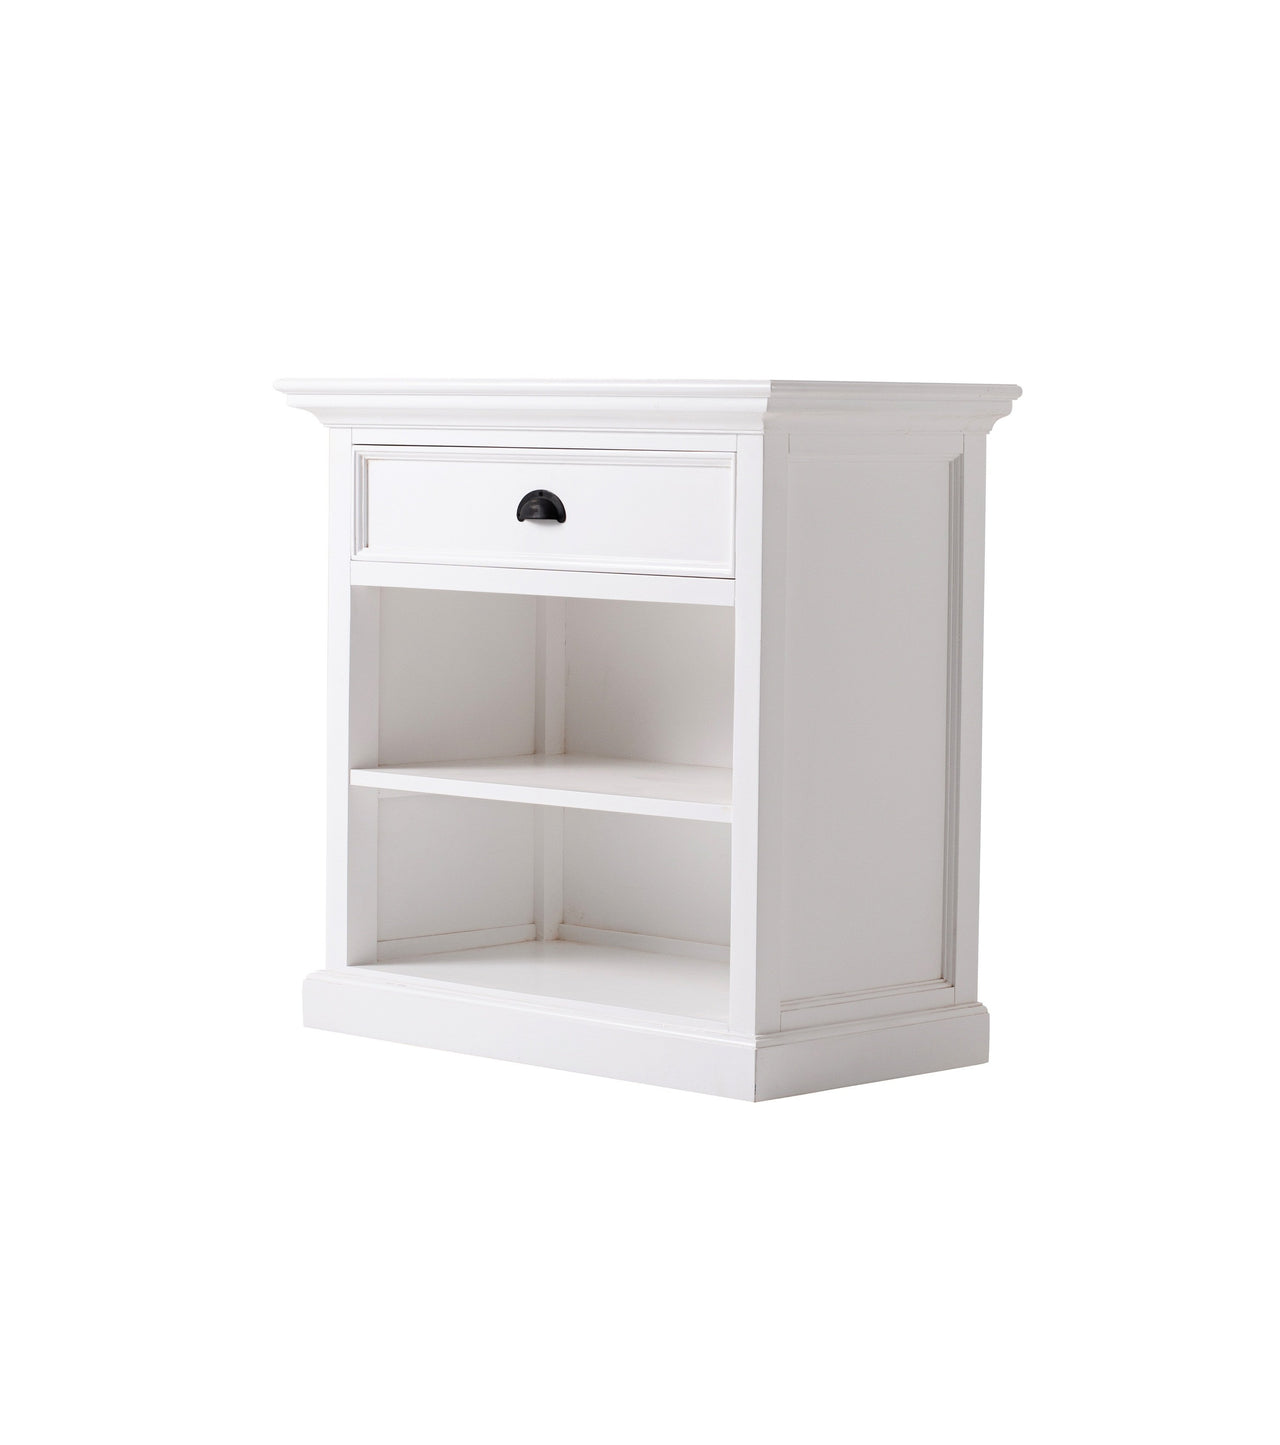 Bedside Table with Shelves Bedside Table NovaSolo Classic White Color 